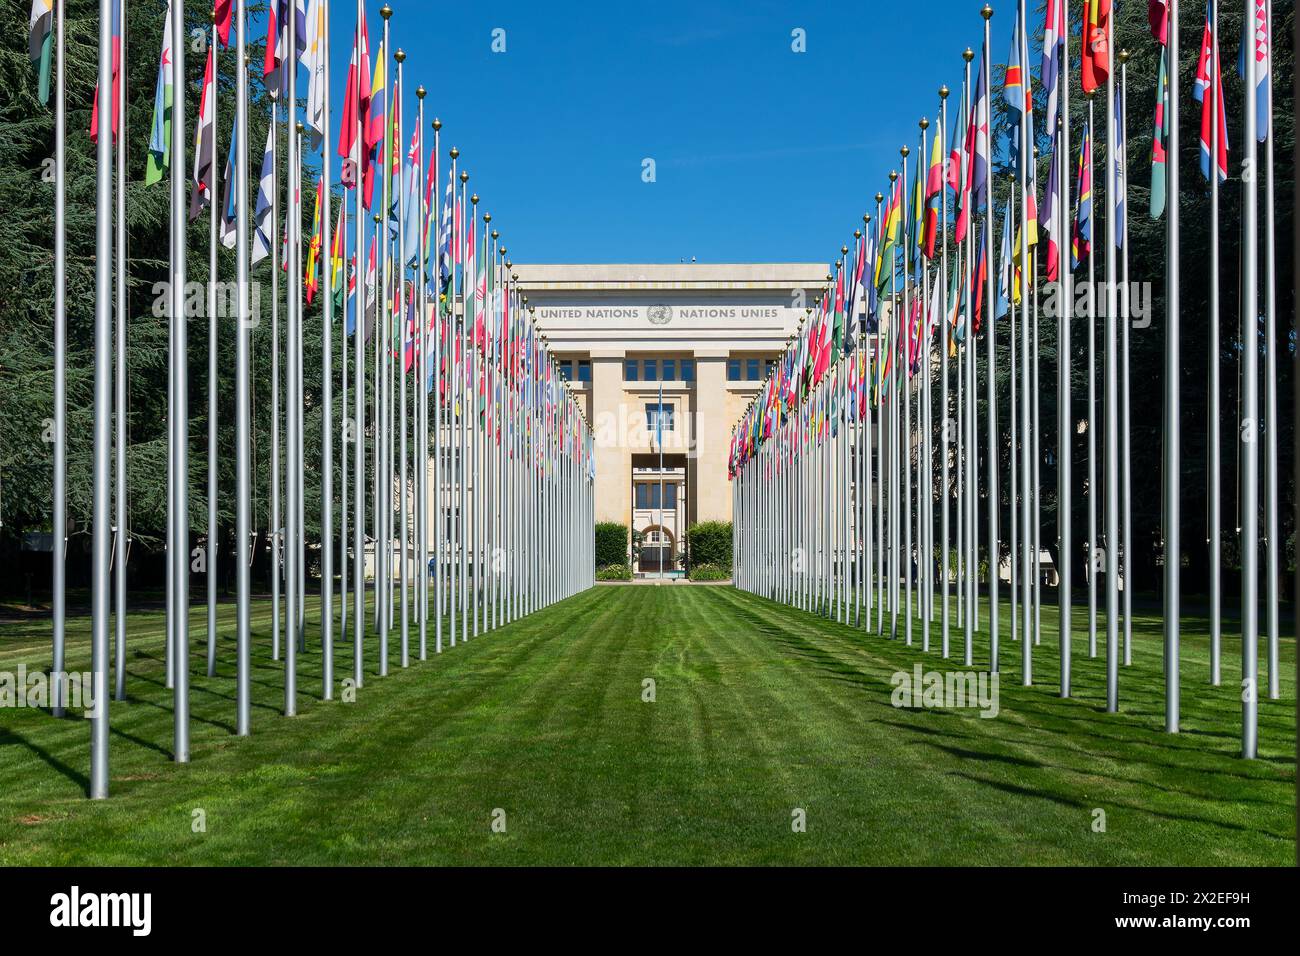 Ranges of flags at the UN (United Nations) office in the Palais des Nations in Geneva, Switzerland Stock Photo